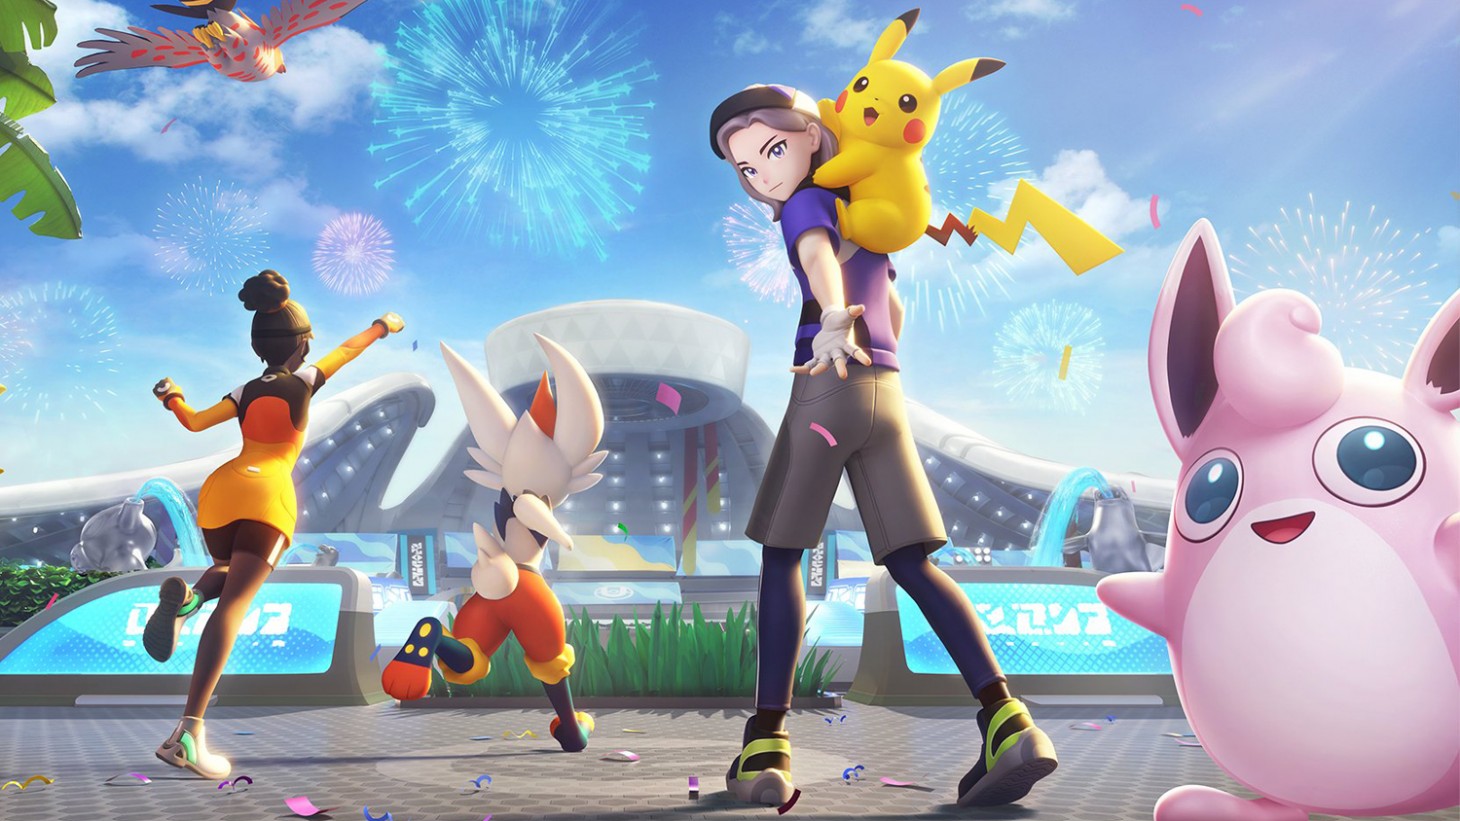 POKÉMON UNITE Is a New Free-to-Play Multiplayer Online Battle